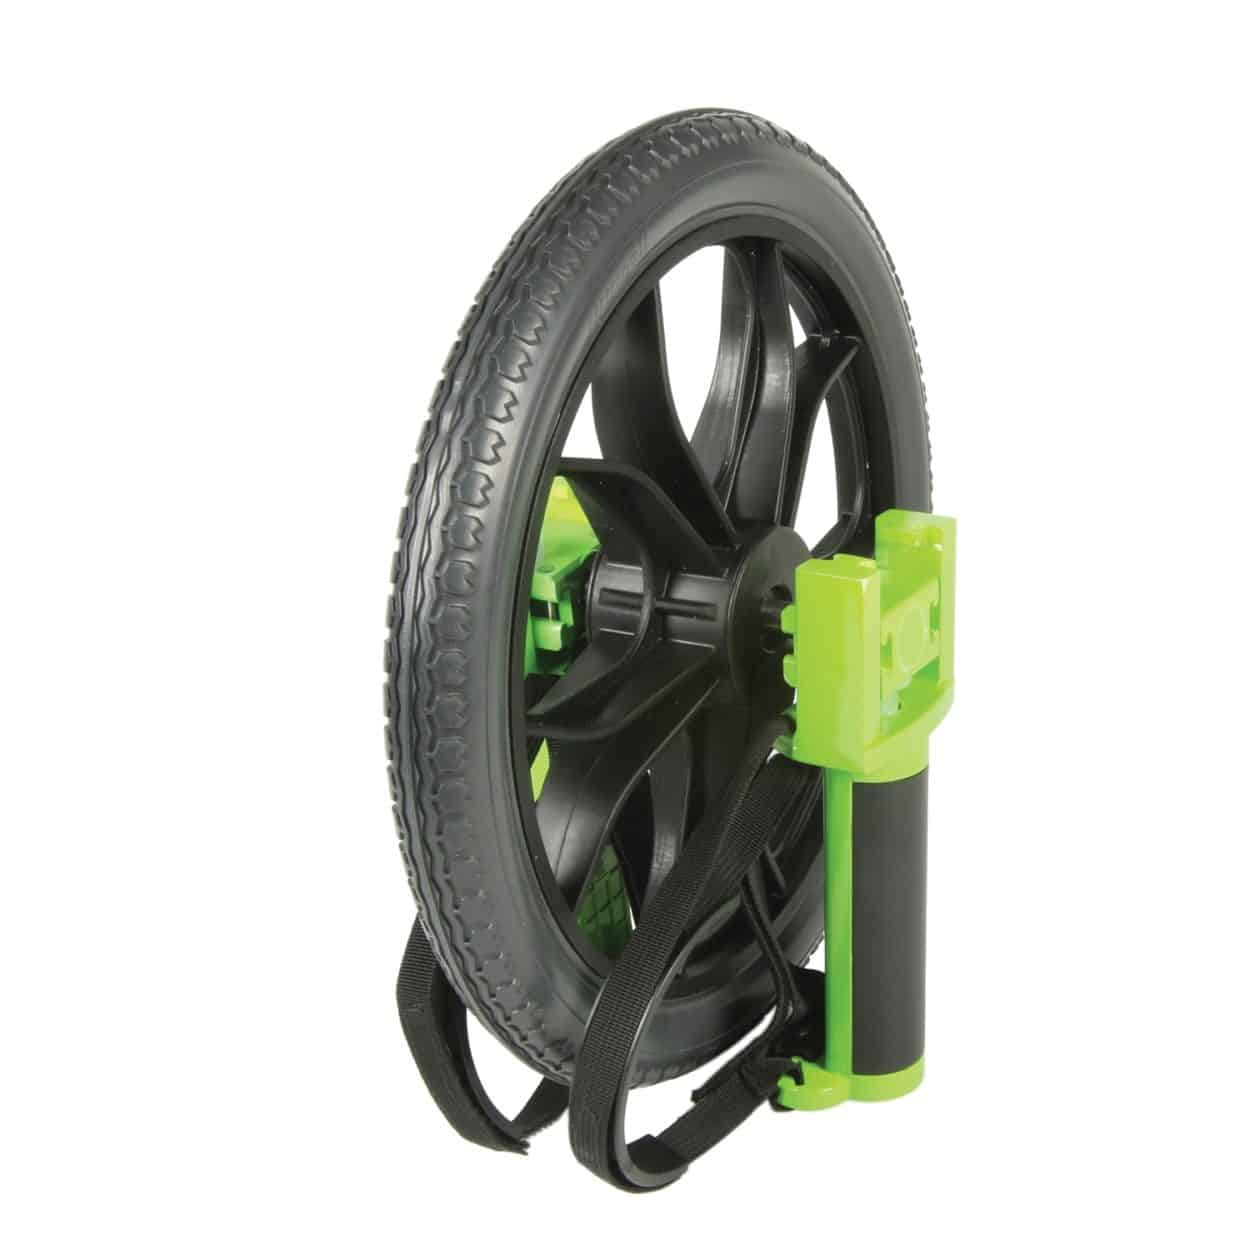 Prism Smart Self-Guided Smart Core Ab Wheel With Mat